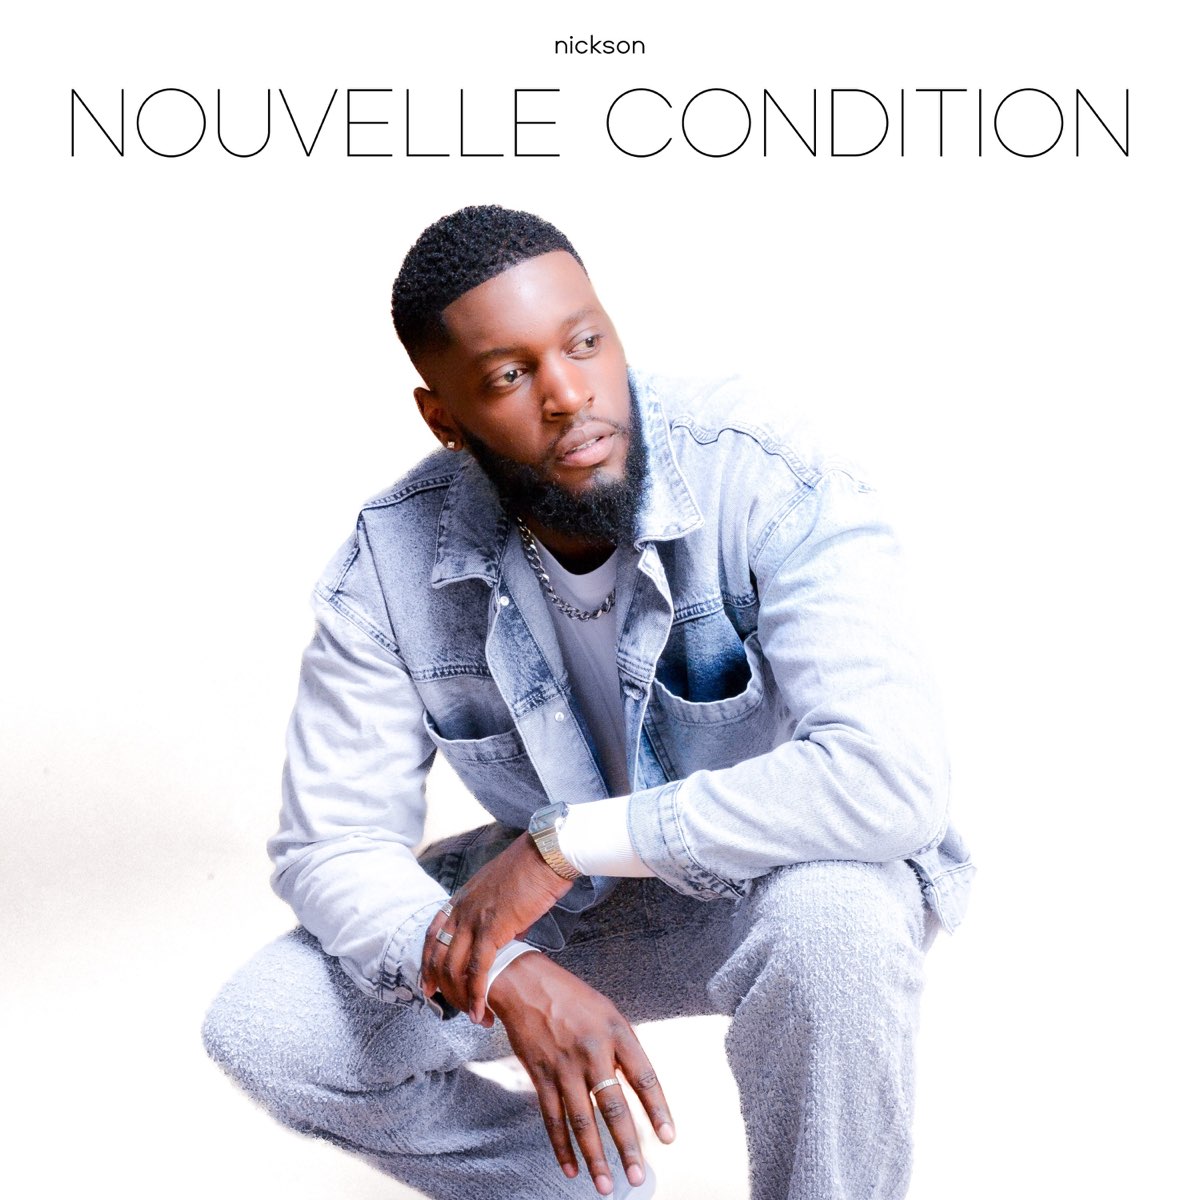 Nouvelle condition by Nickson on Apple Music